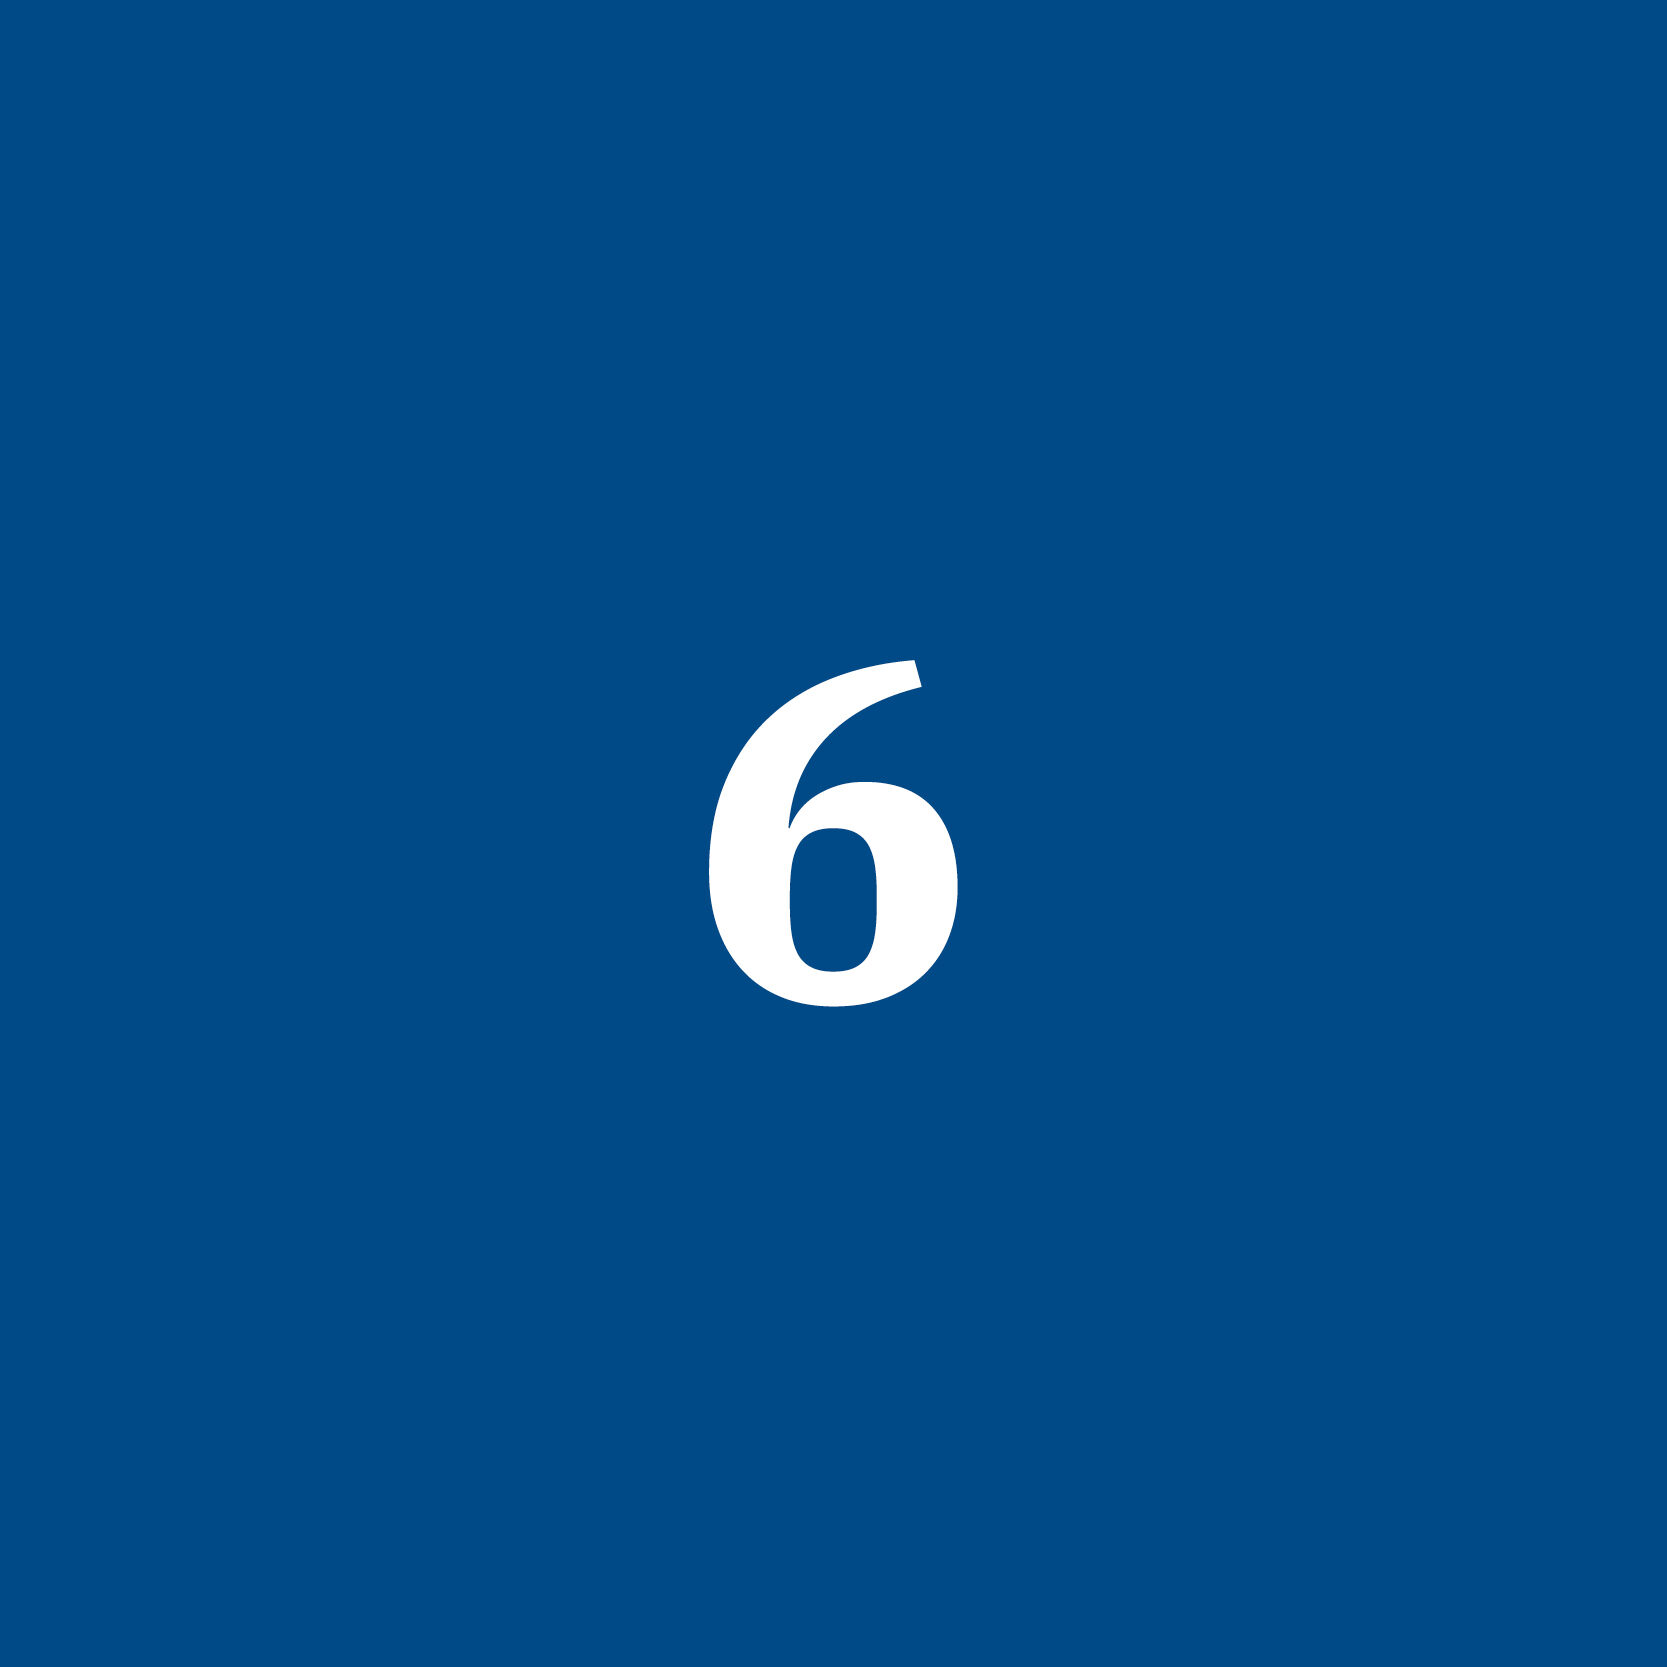 Blue background with a white number 6